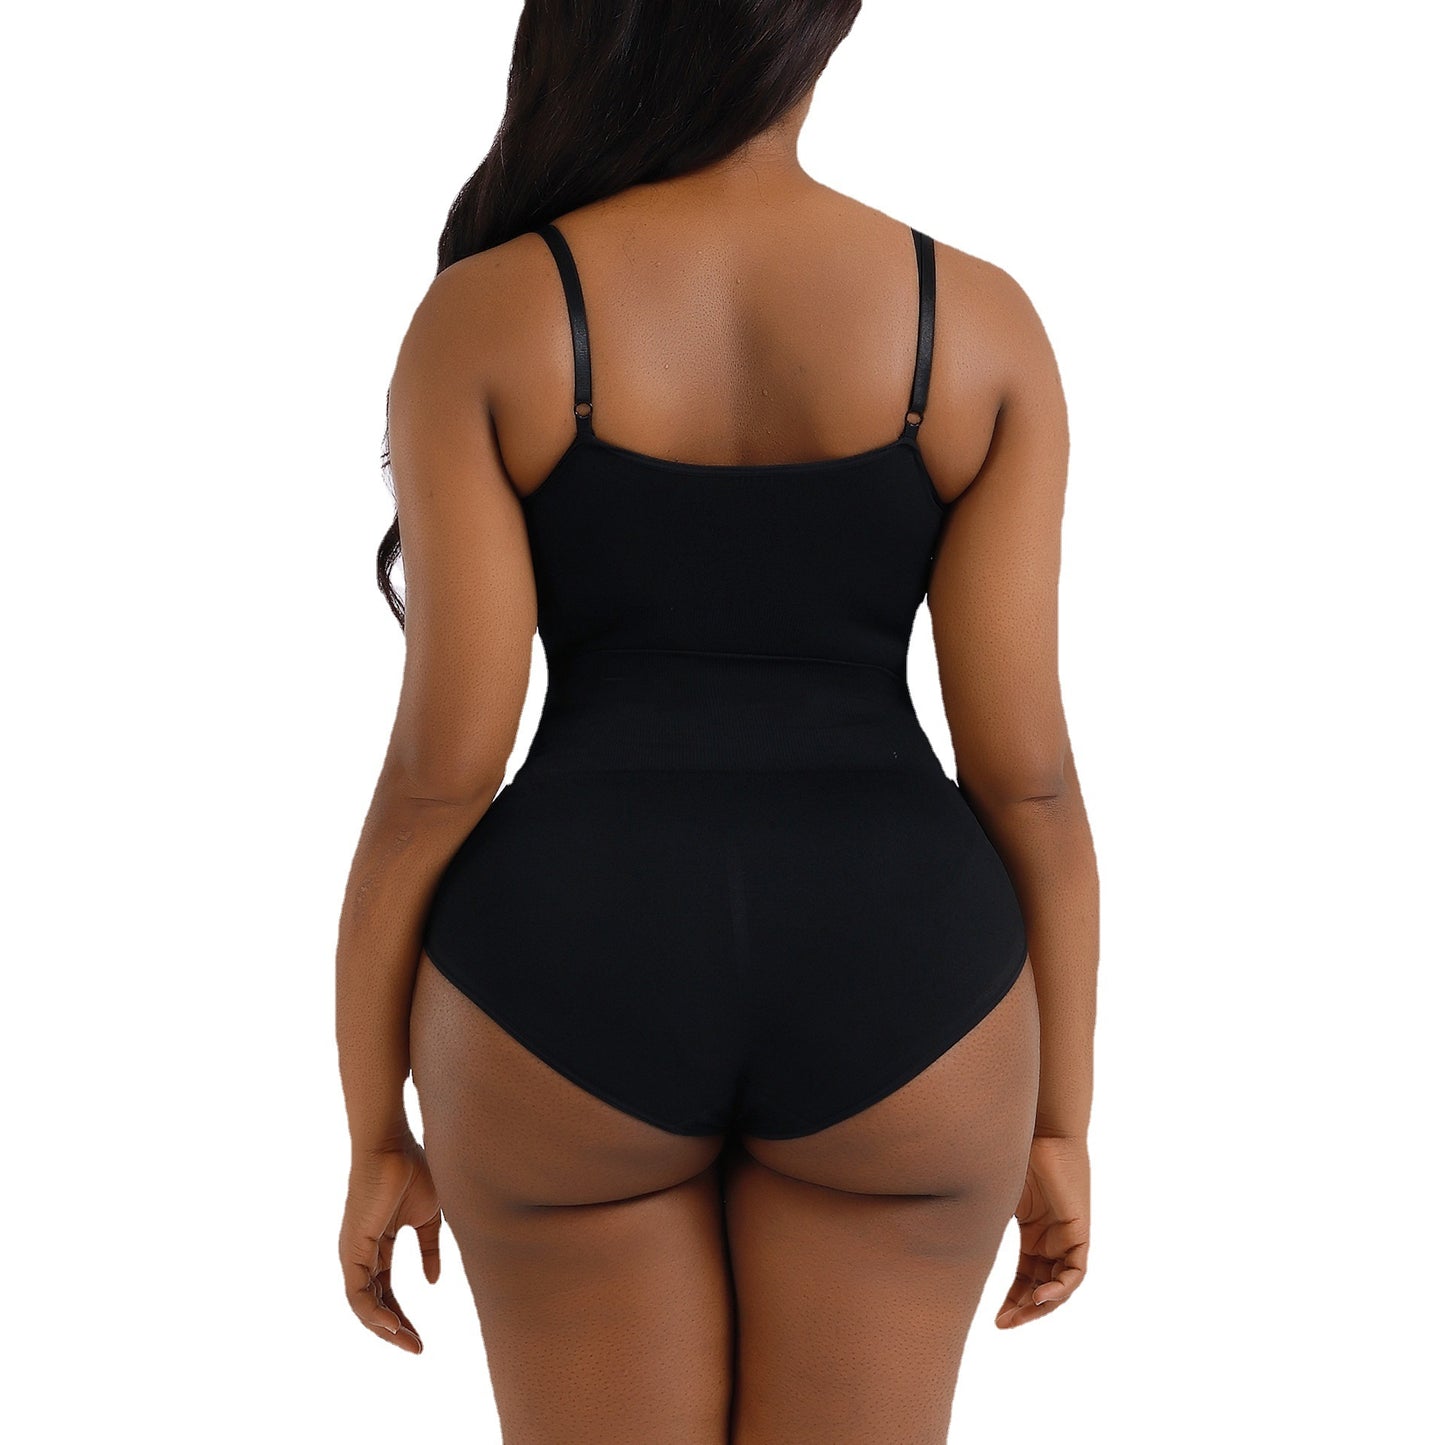 a woman in a black swimsuit with her back to the camera